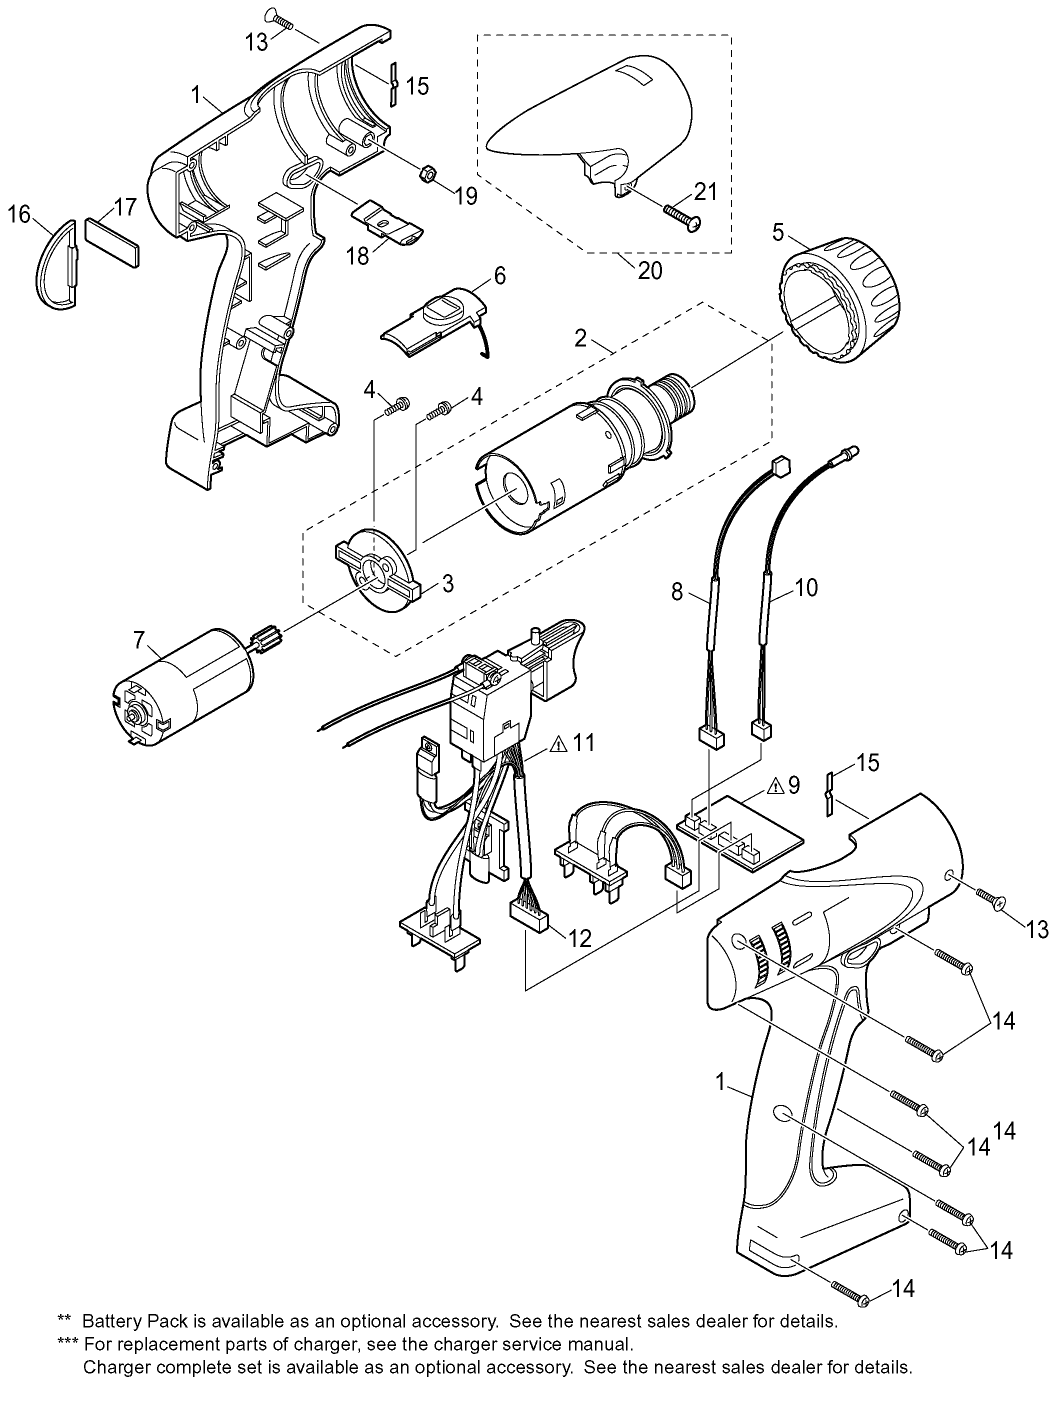 EYFEA1: Exploded View